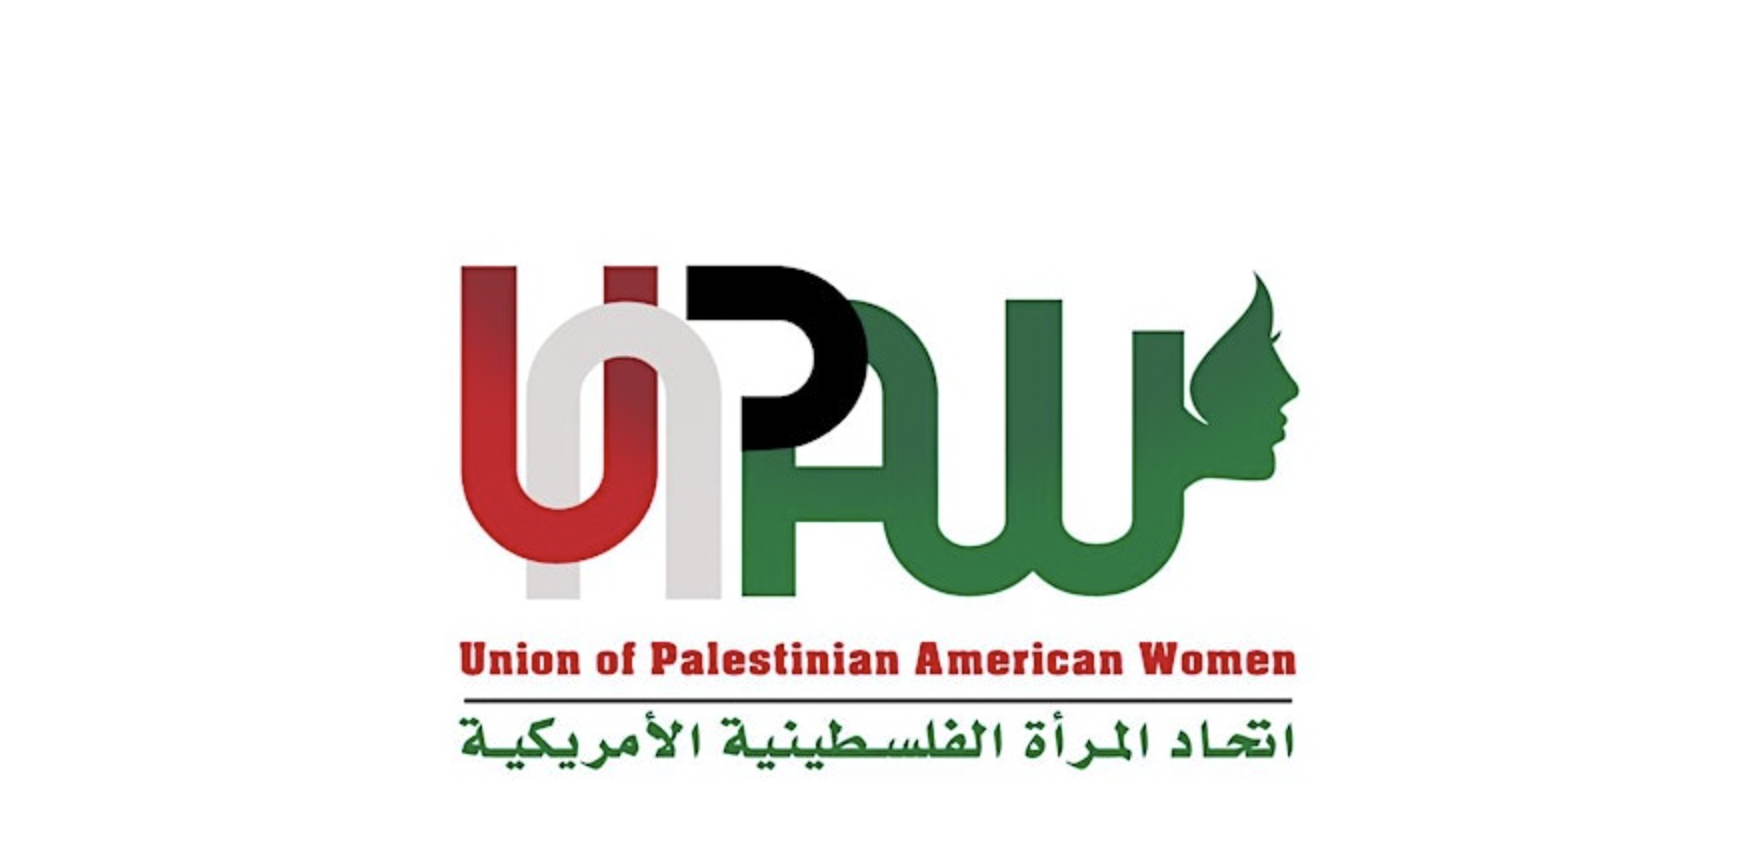 The Union's Annual Benefit for Palestine